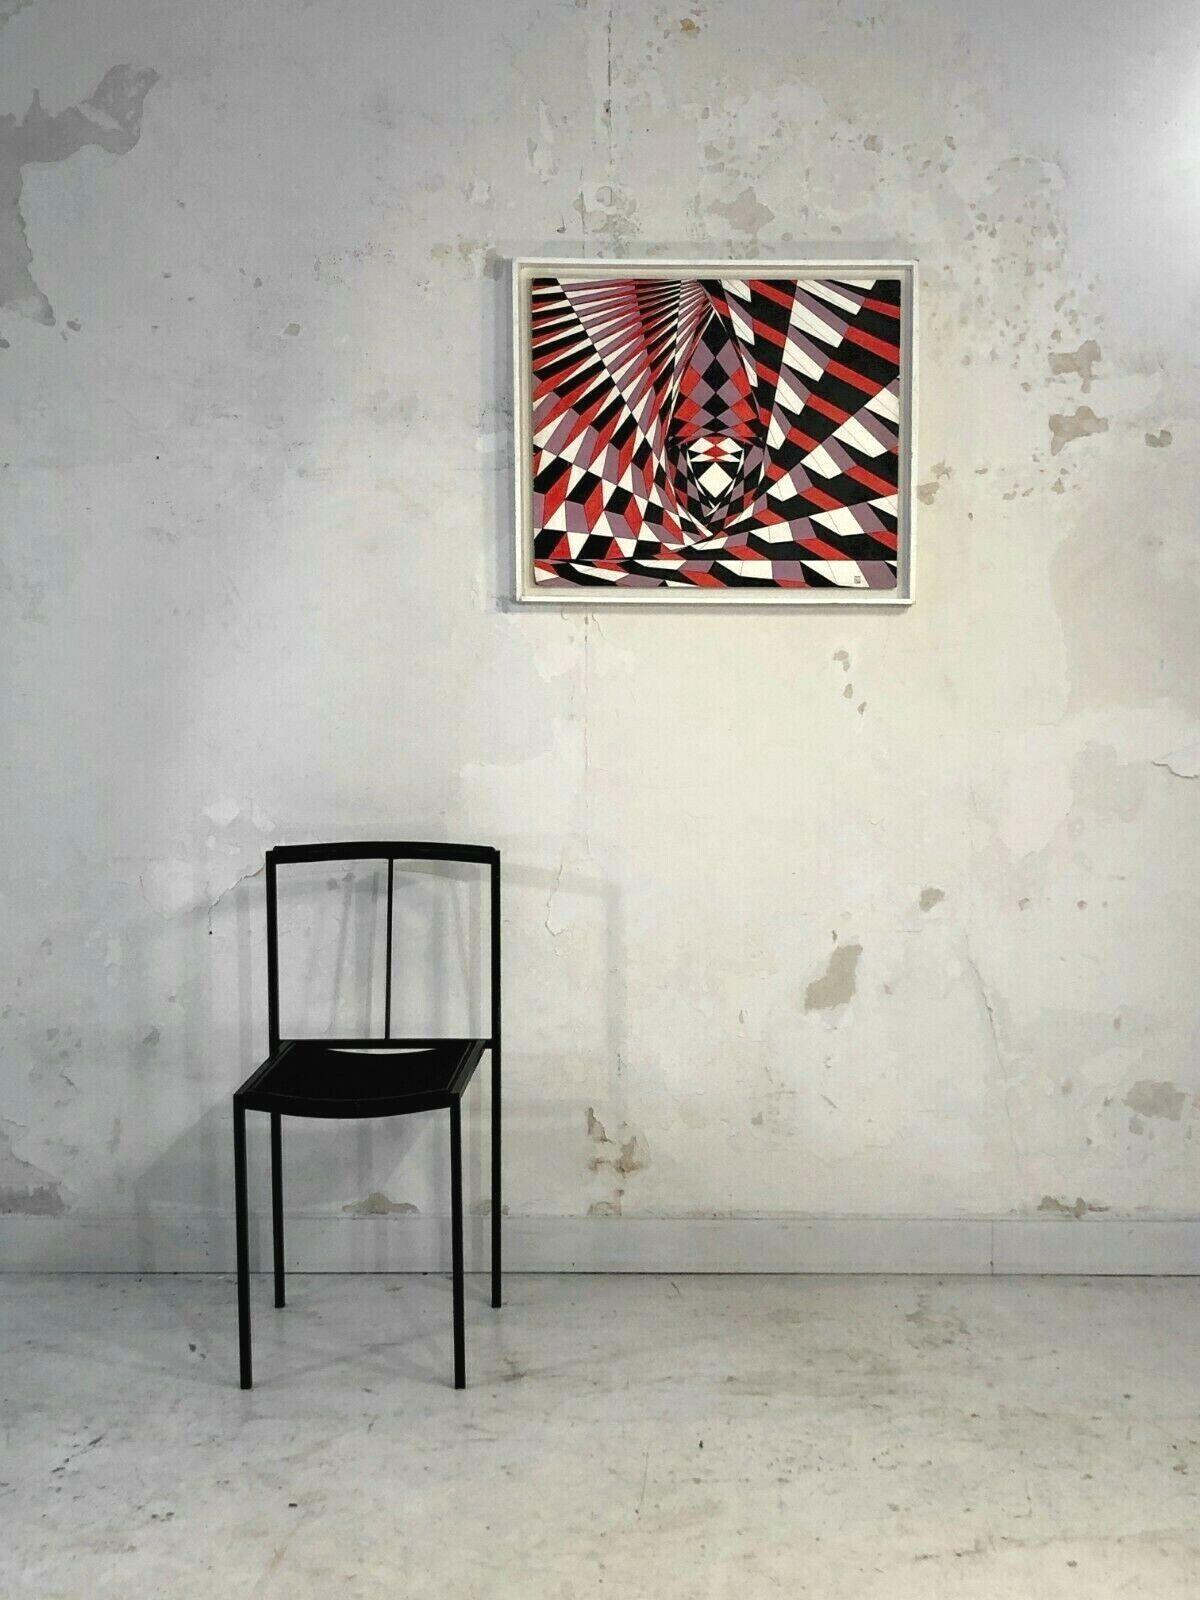 Kinetic An OPTICAL POP OP-ART KINETIC PAINTING on Panel by GUY POUPPEZ, France 1968 For Sale